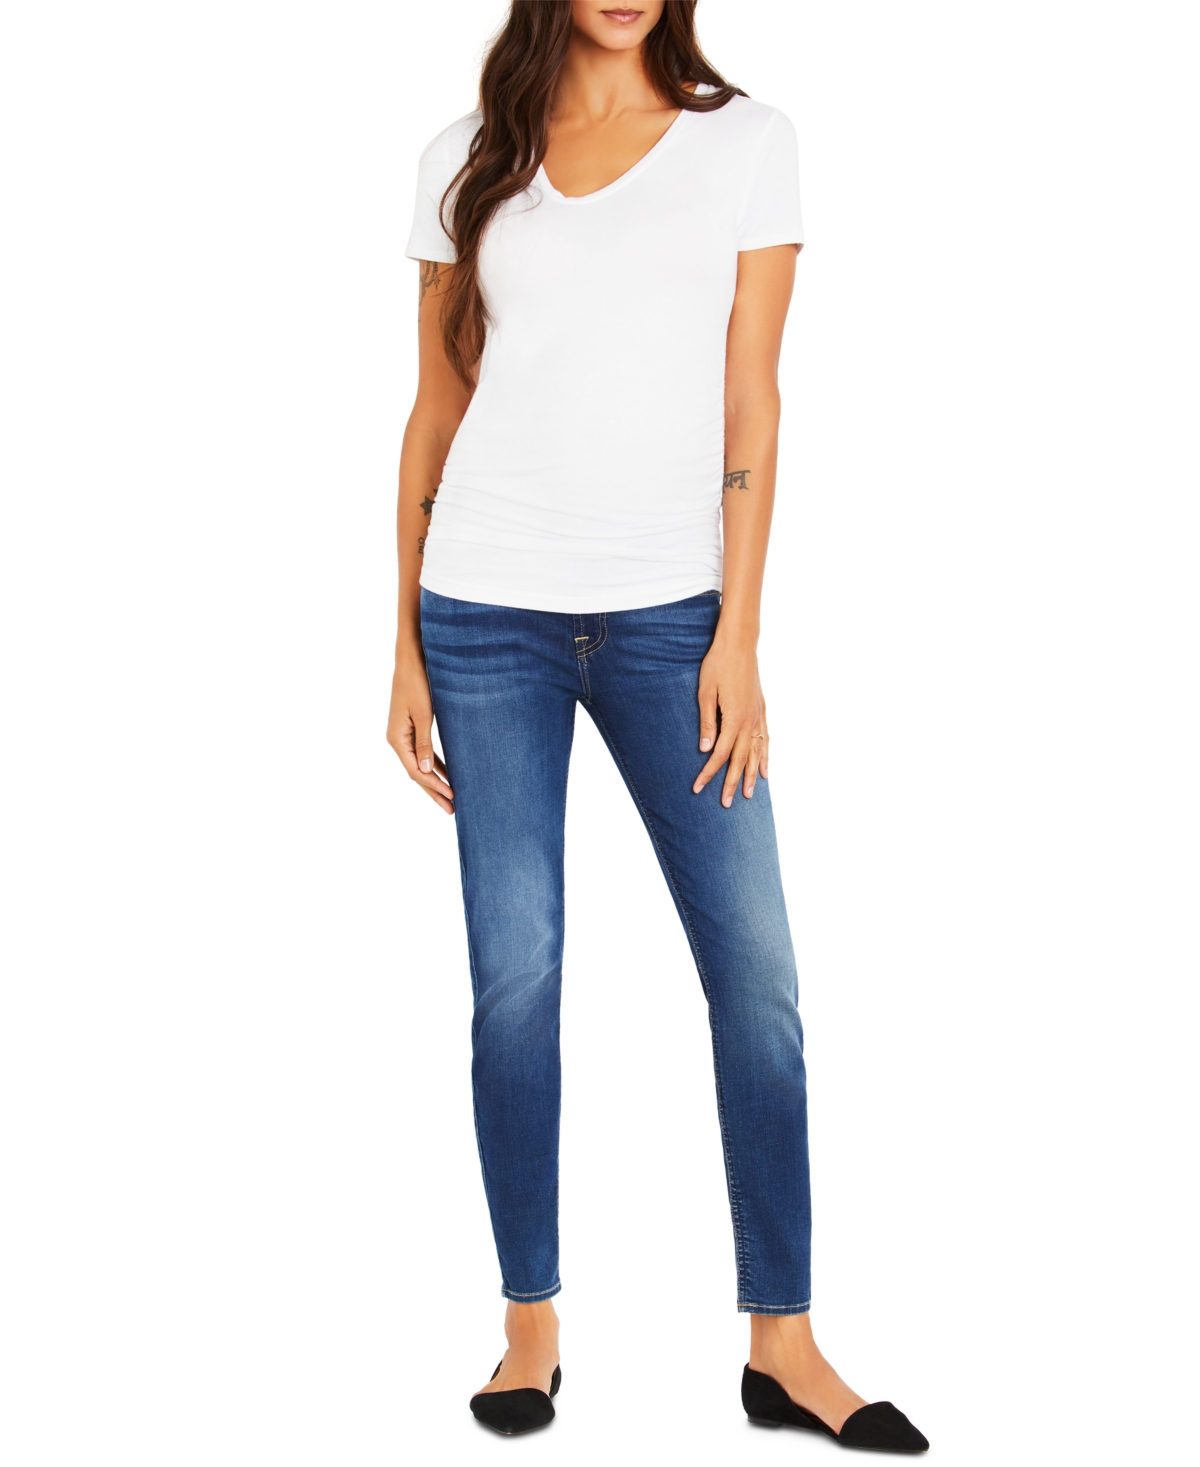  7 For All Mankind Secret Fit Belly B(Air) Skinny Maternity Jeans